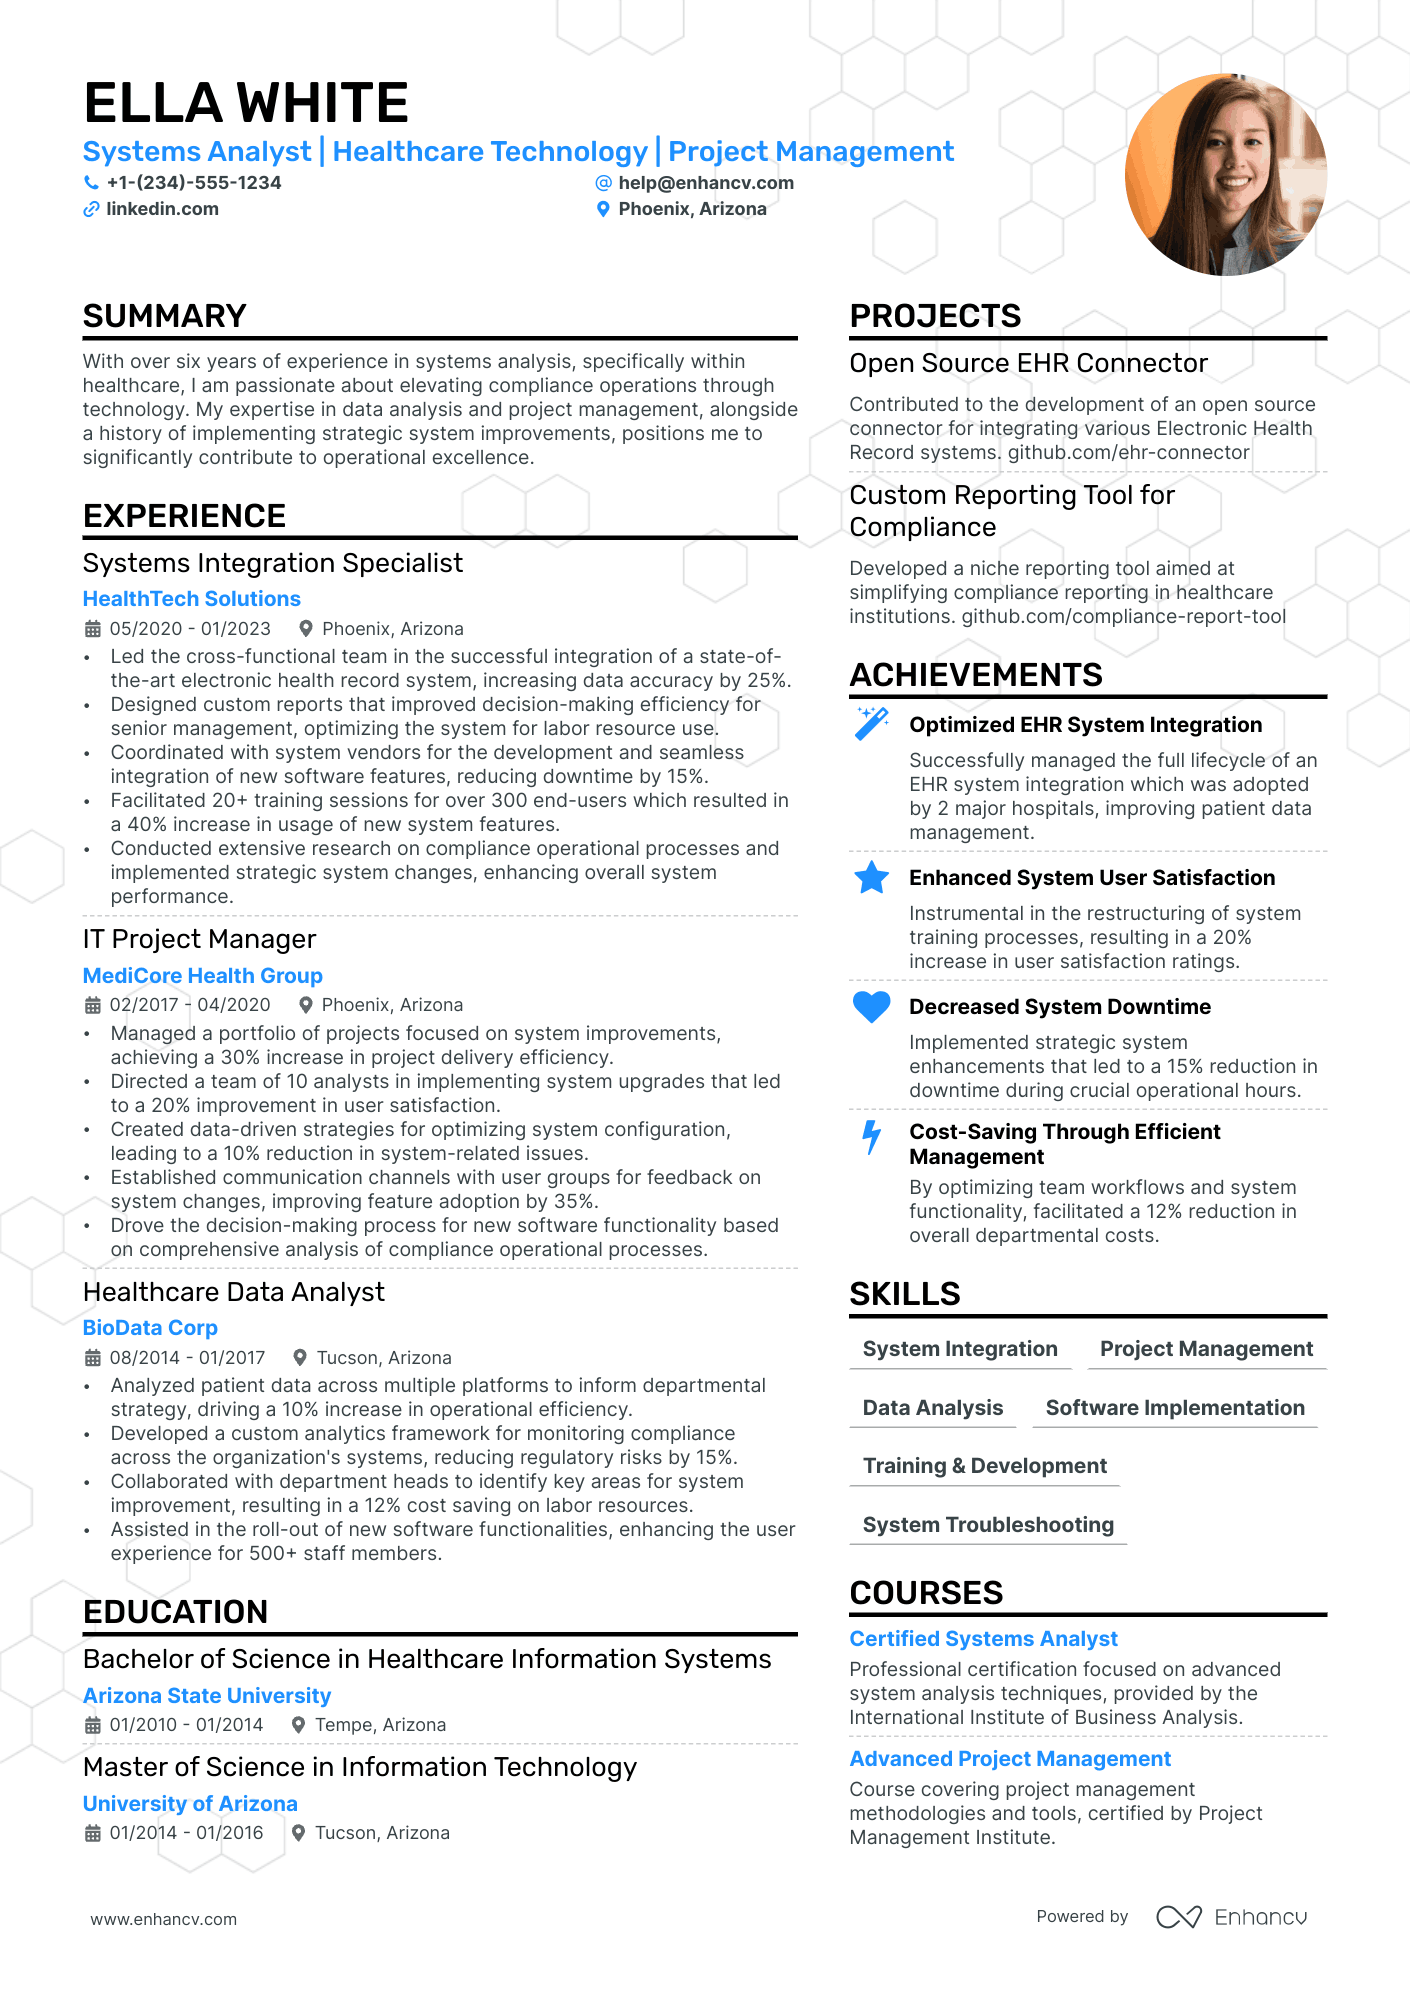 System Analyst resume example